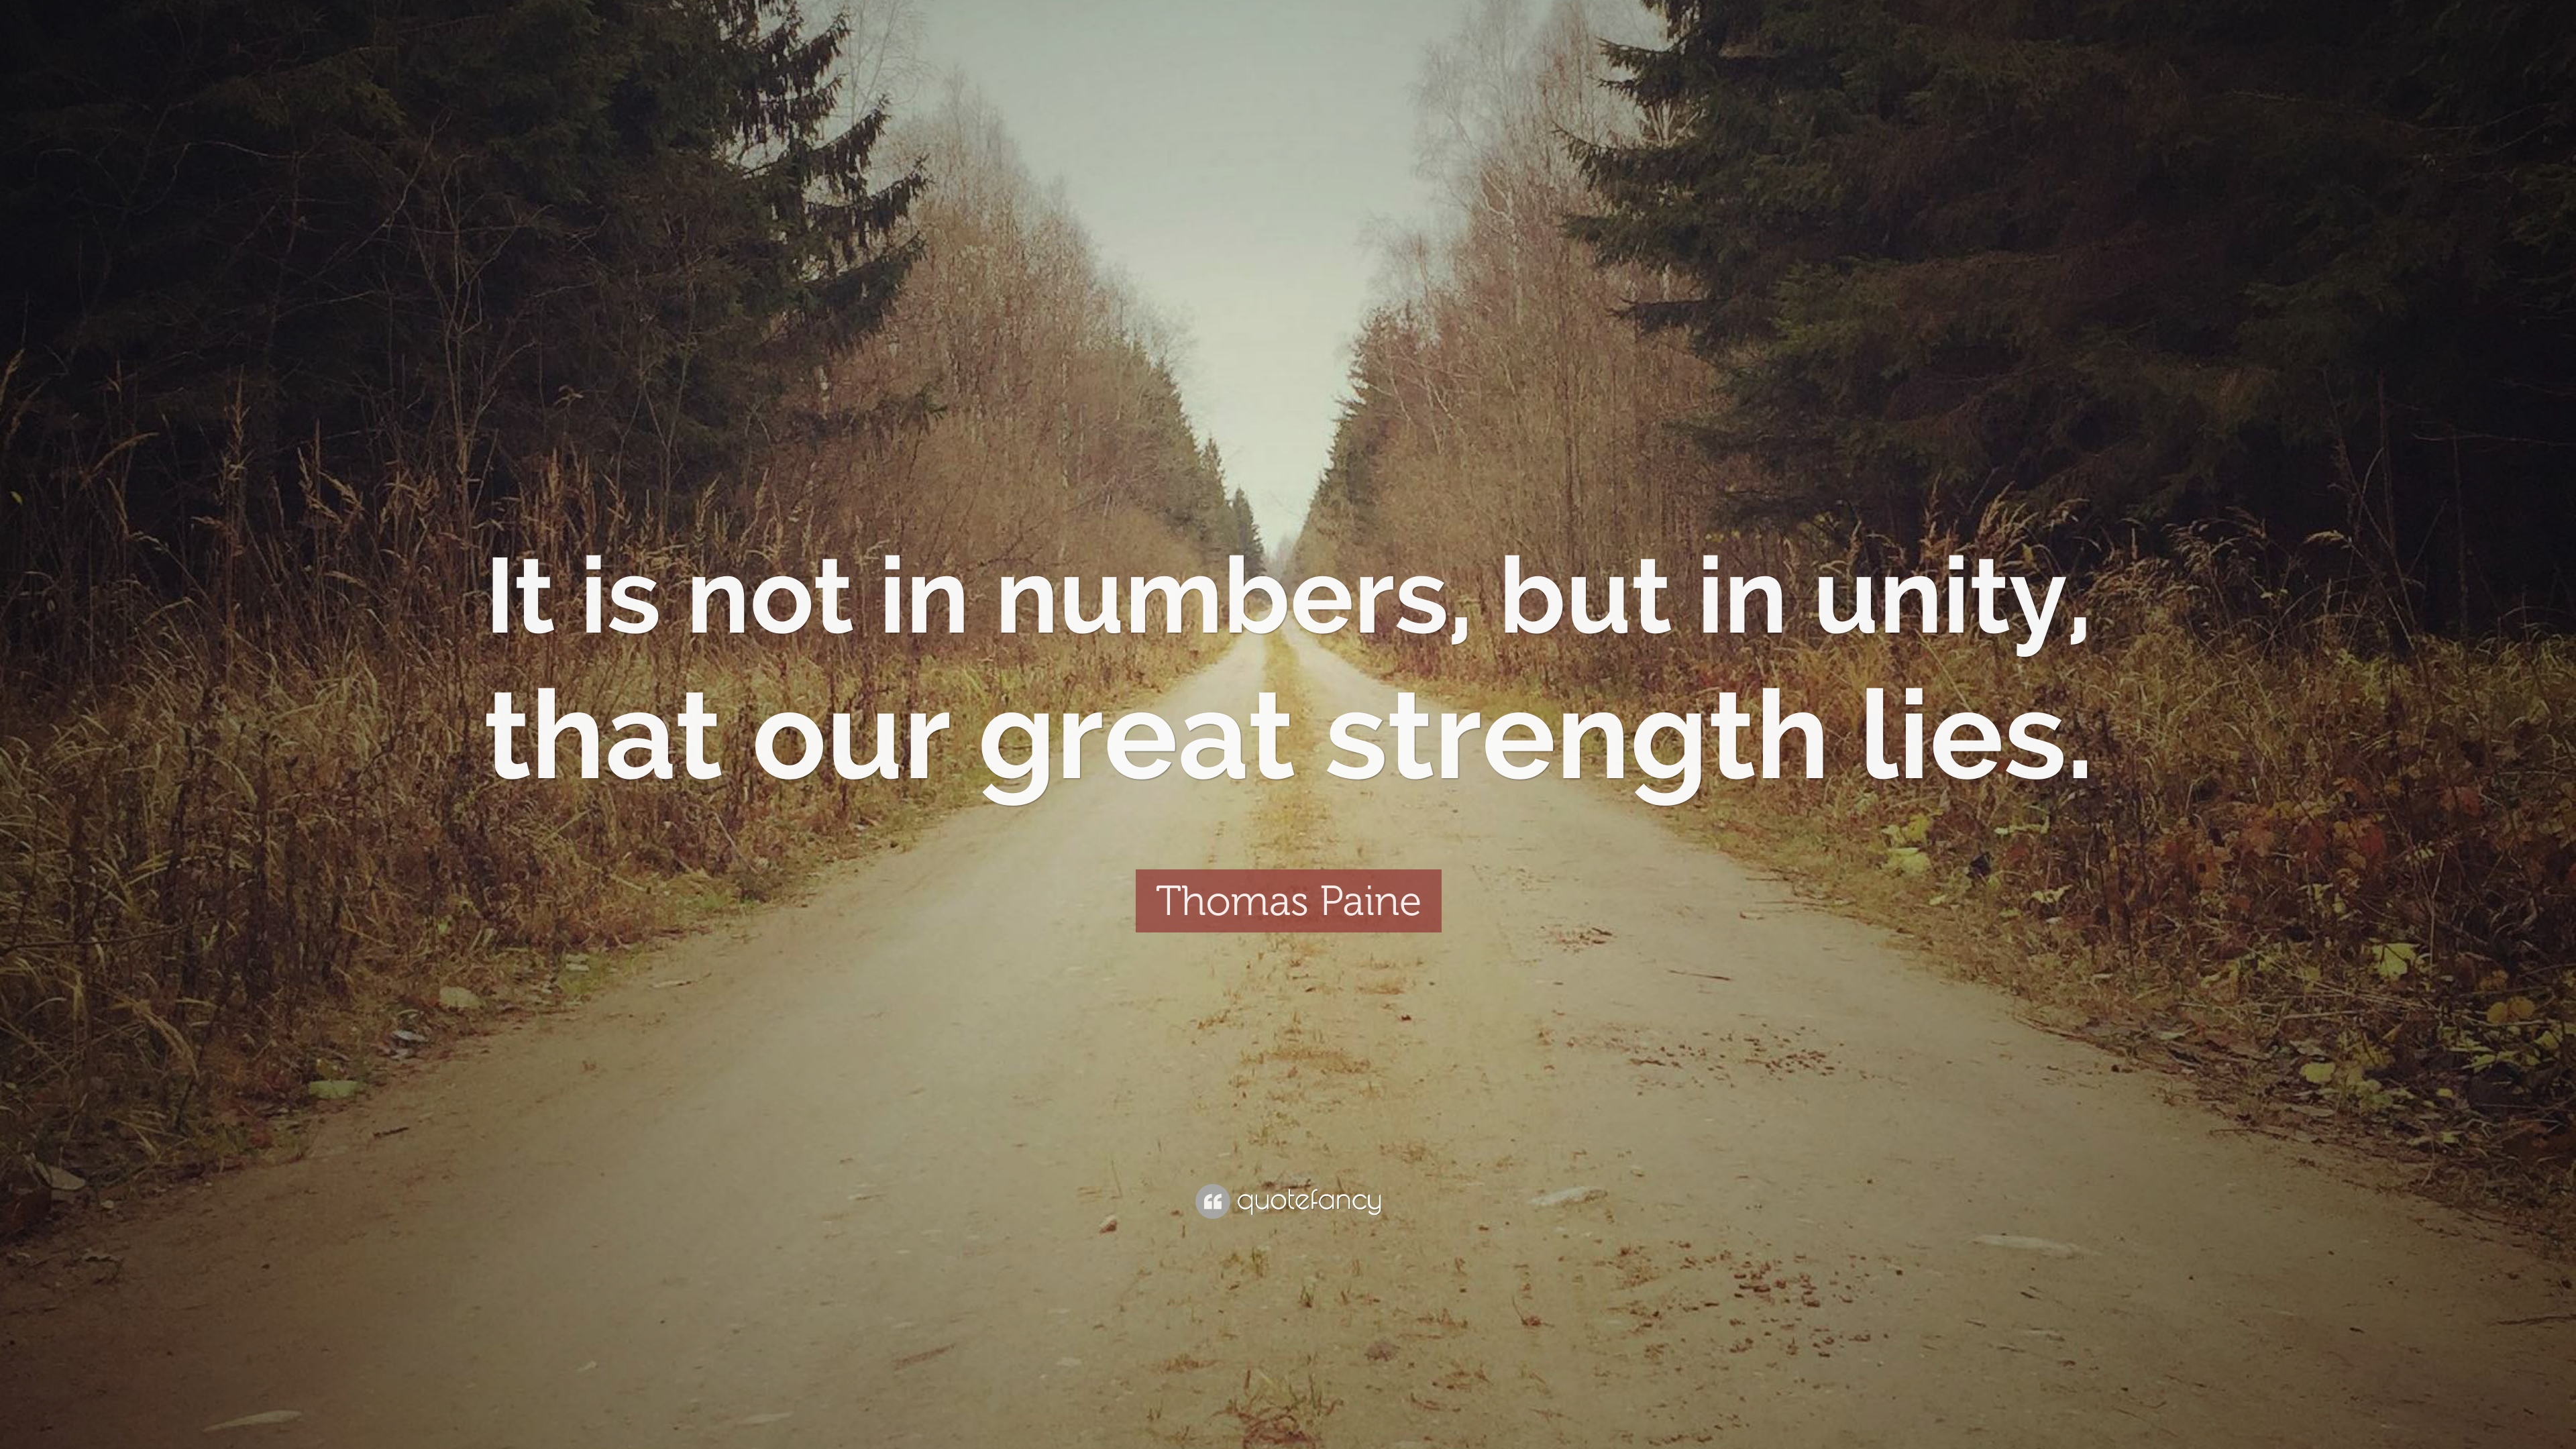 it is not in number, but in unity that our great strength lies. thomas paine